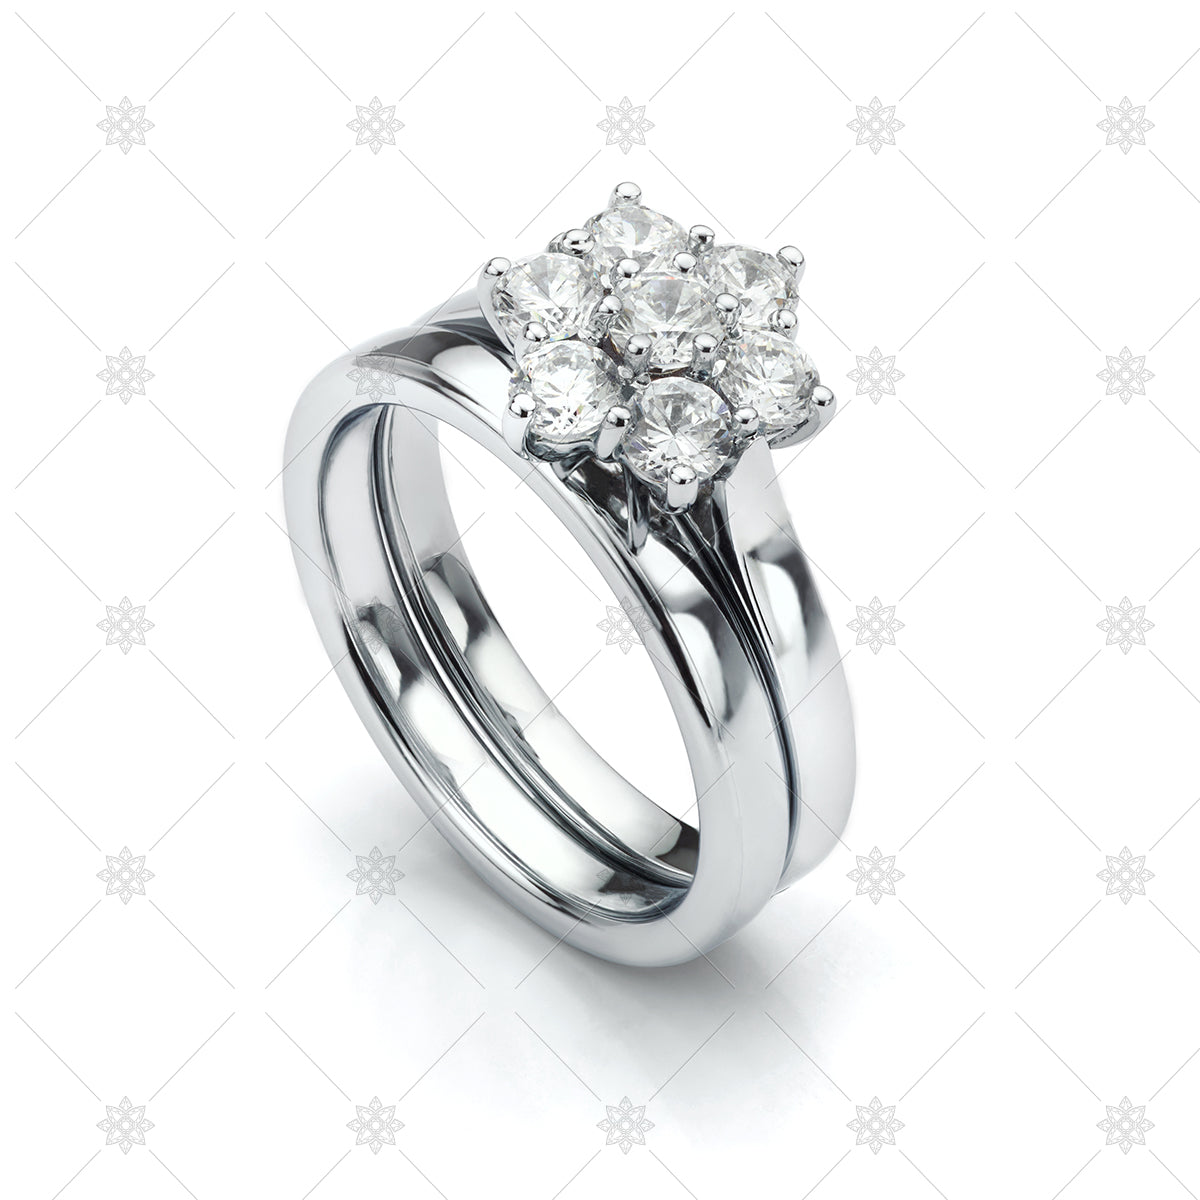 Daisy Engagement and Wedding ring set - LS1025